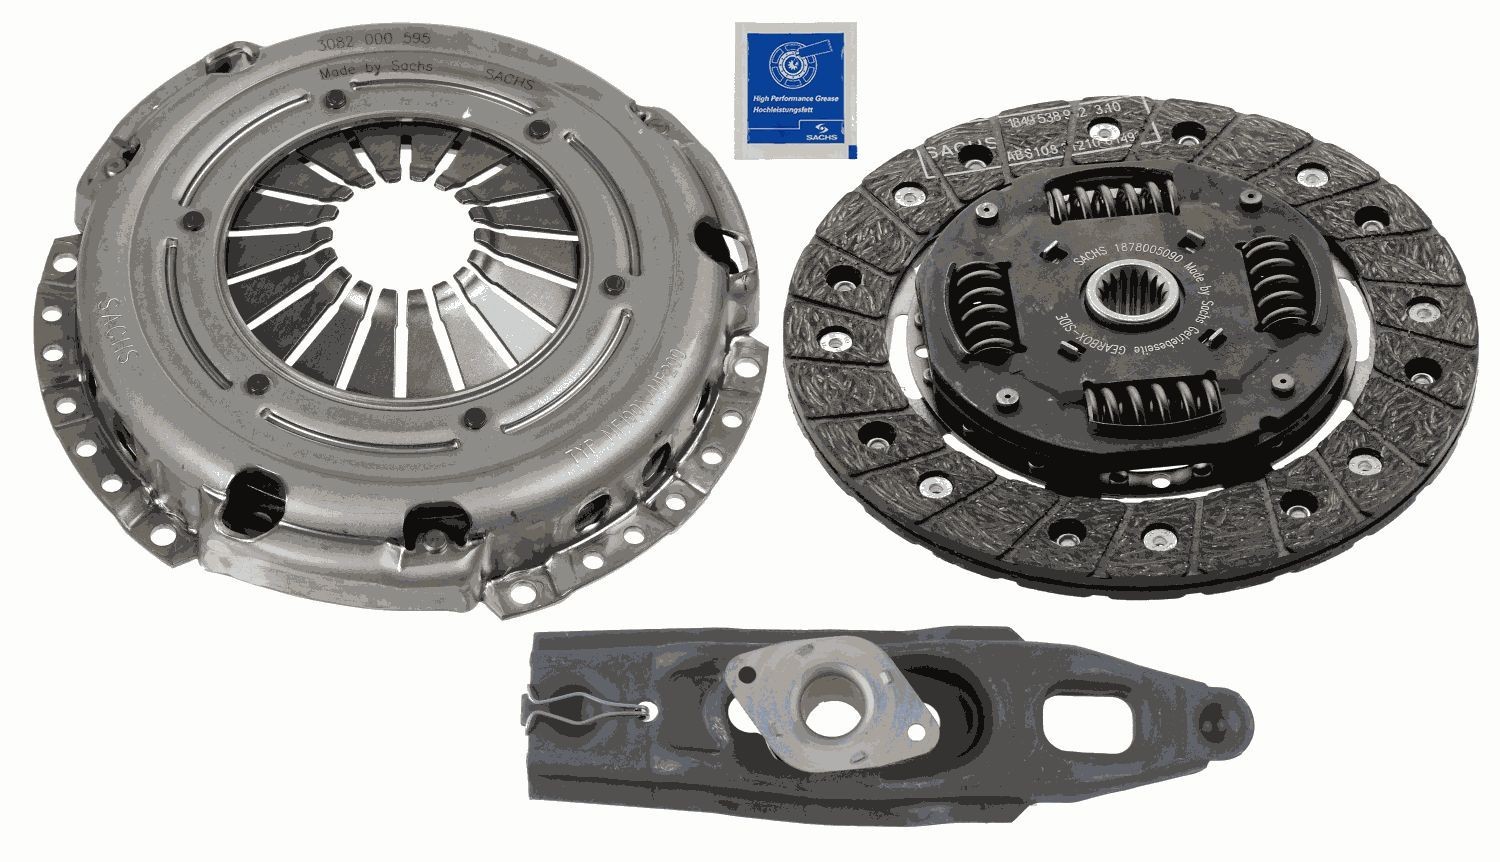 Clutch kit SACHS 3000 950 001 - Clutch spare parts for Smart order